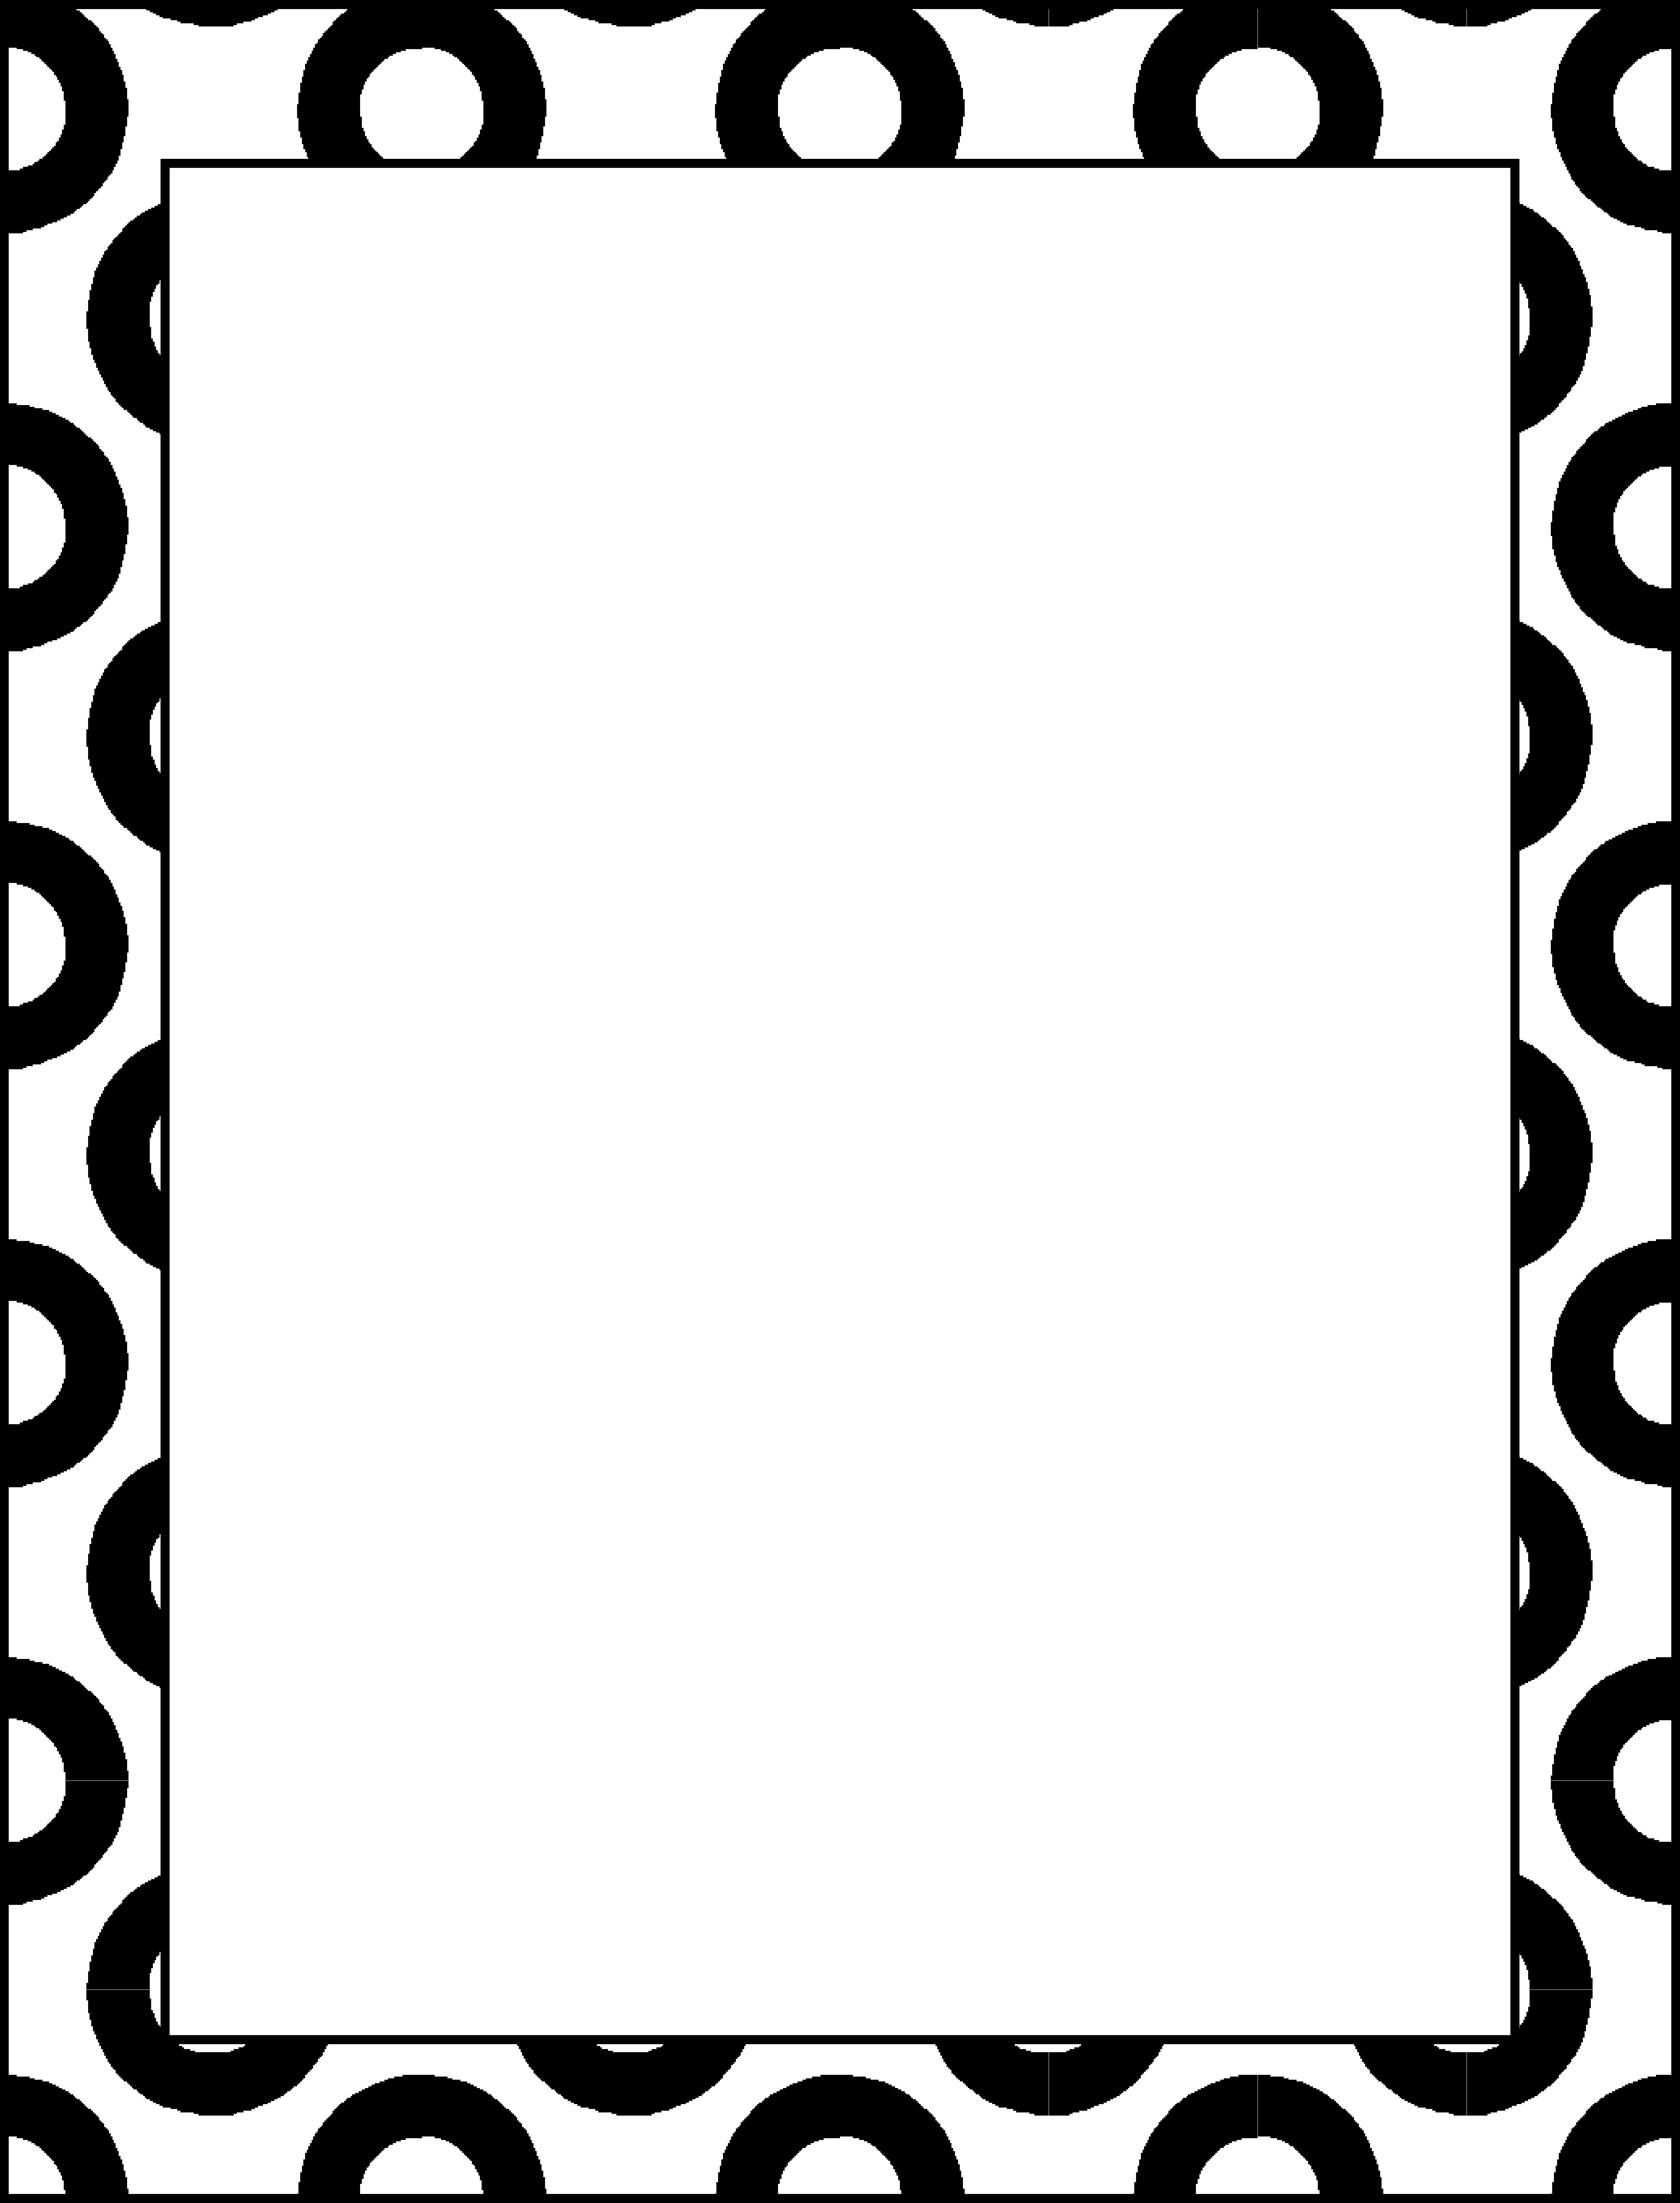 Line Border Designs For School Projects - Clipart library